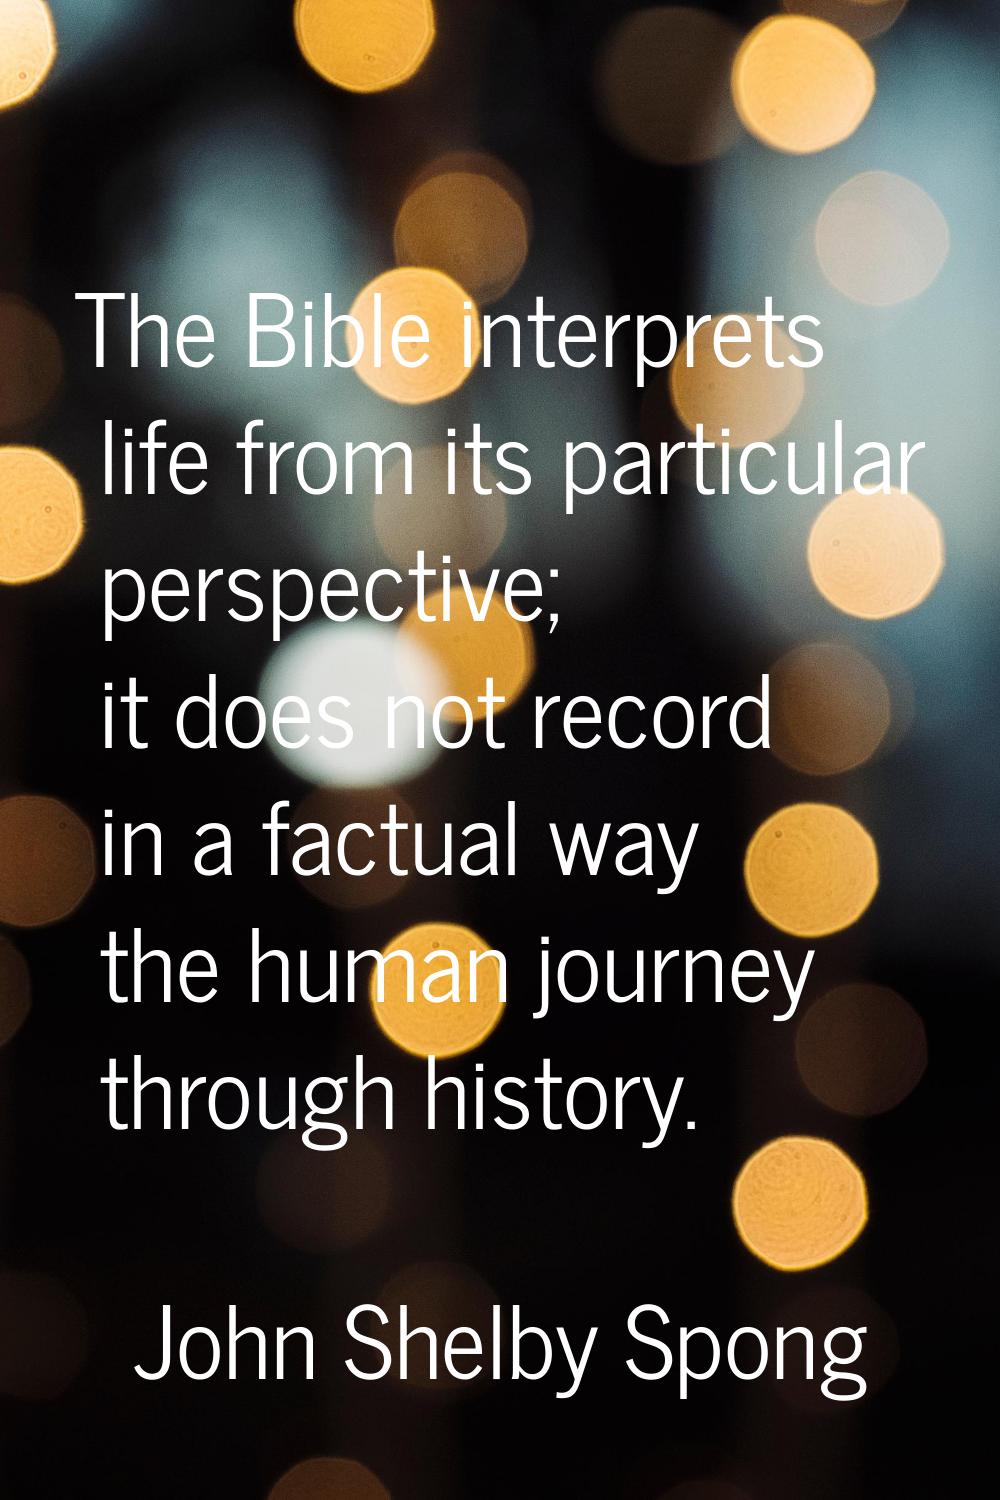 The Bible interprets life from its particular perspective; it does not record in a factual way the 